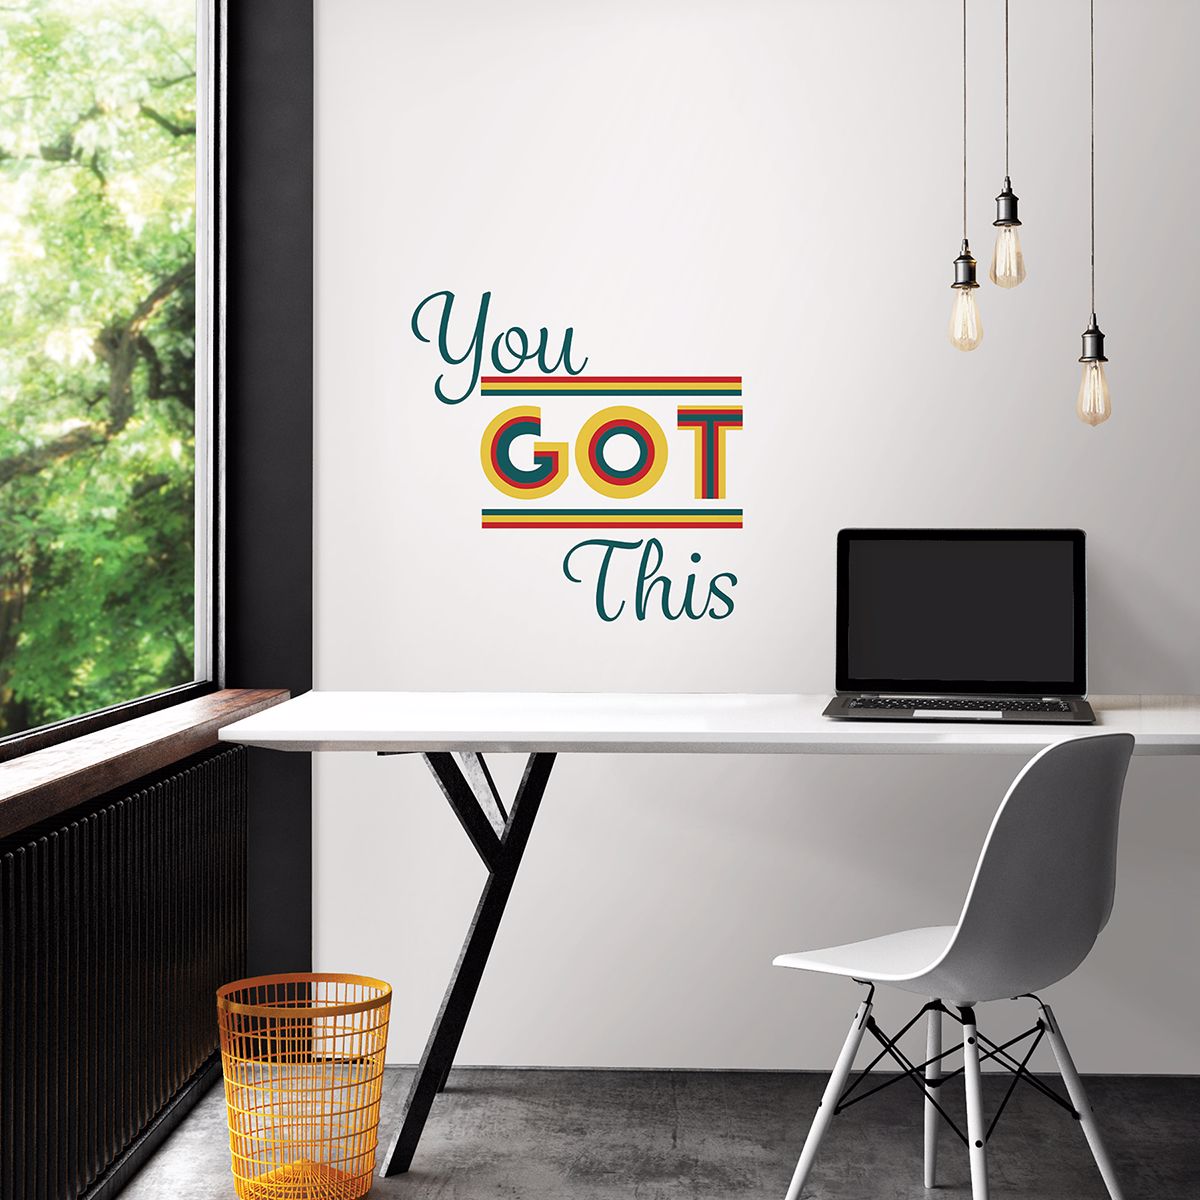 DWPQ3540 - You Got This Wall Quote Decals - by WallPops